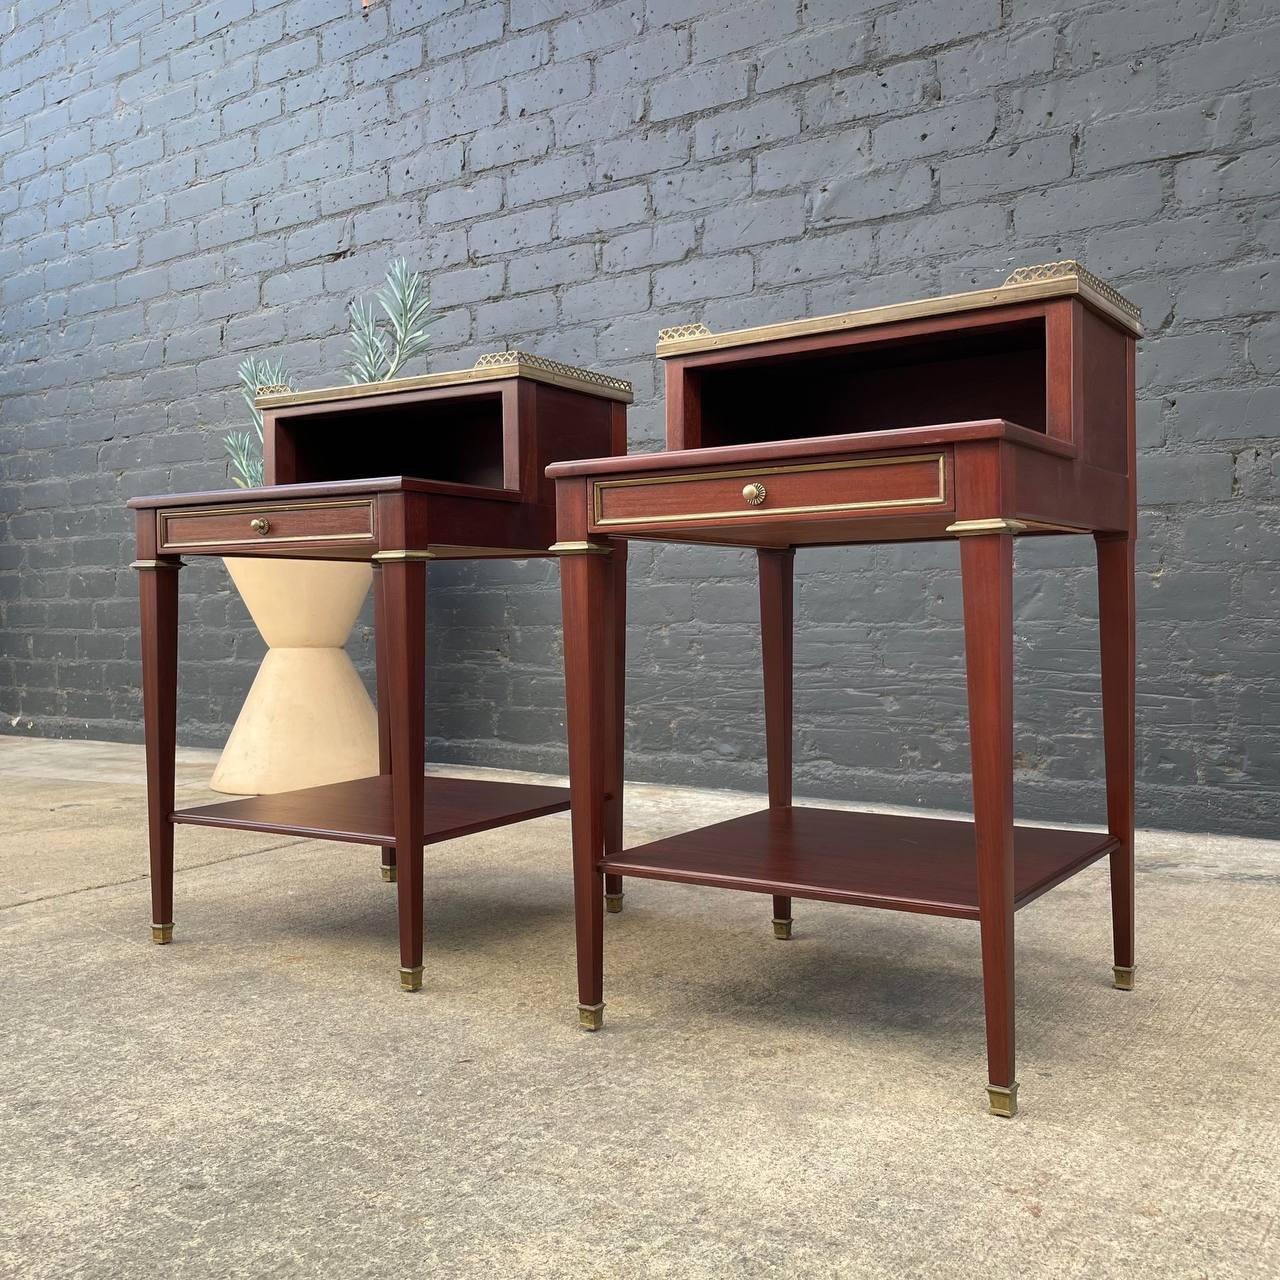 Mid-20th Century Pair of French Neoclassical Nightstands